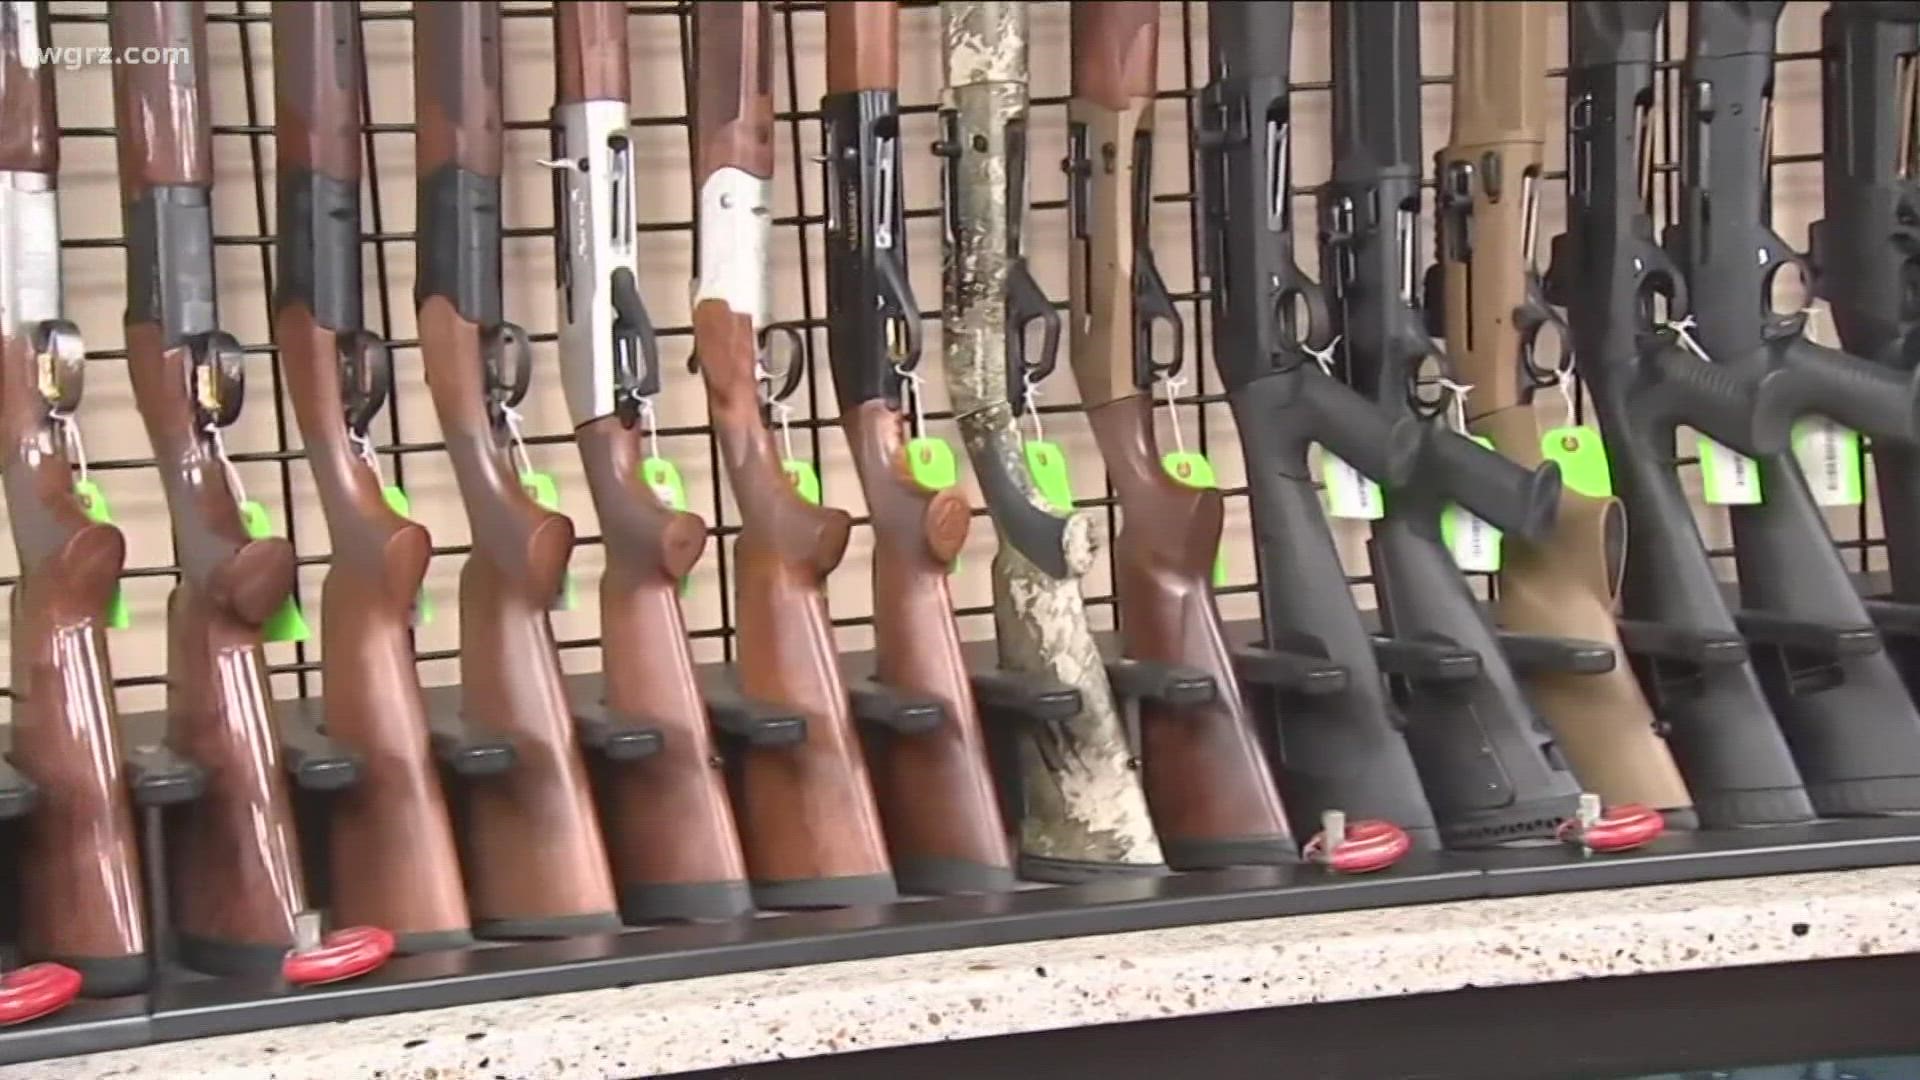 NY Gov. Kathy Hochul said she wants to work with the state Legislature to raise the legal purchasing age for AR-style rifles and will look at other firearms as well.